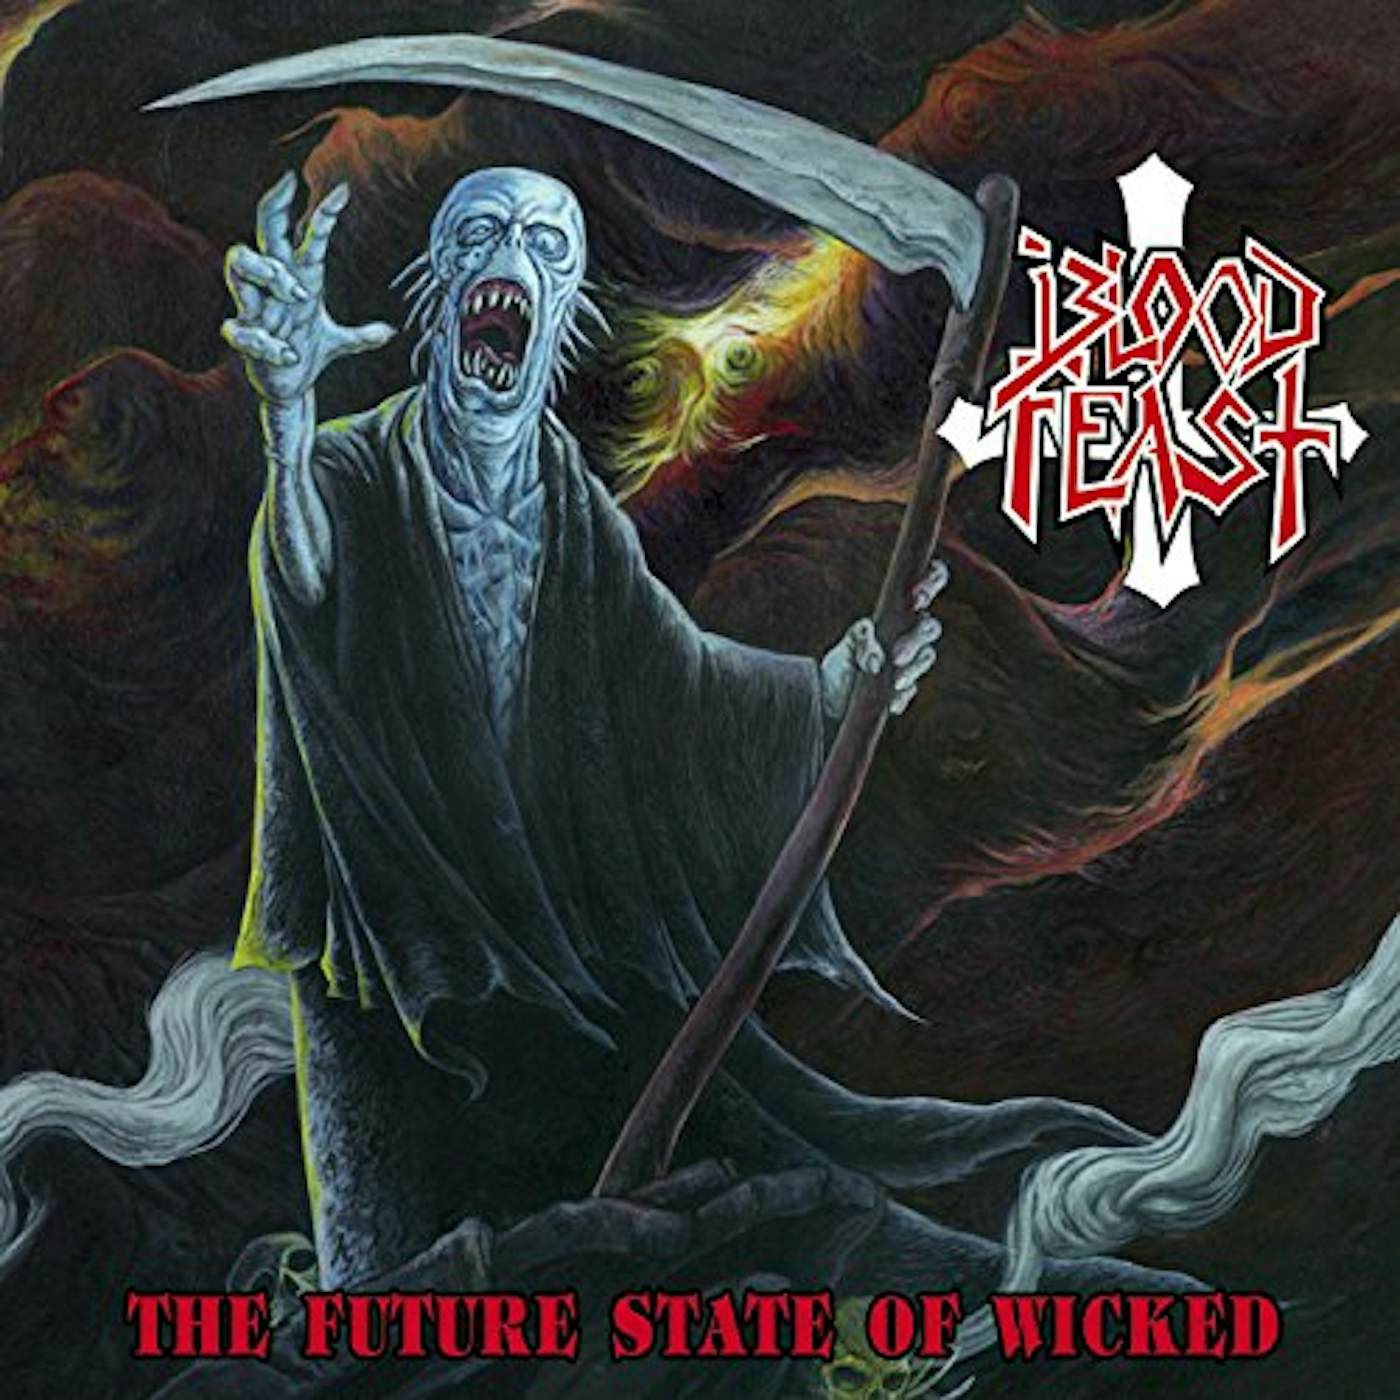 Blood Feast FUTURE STATE OF WICKED Vinyl Record